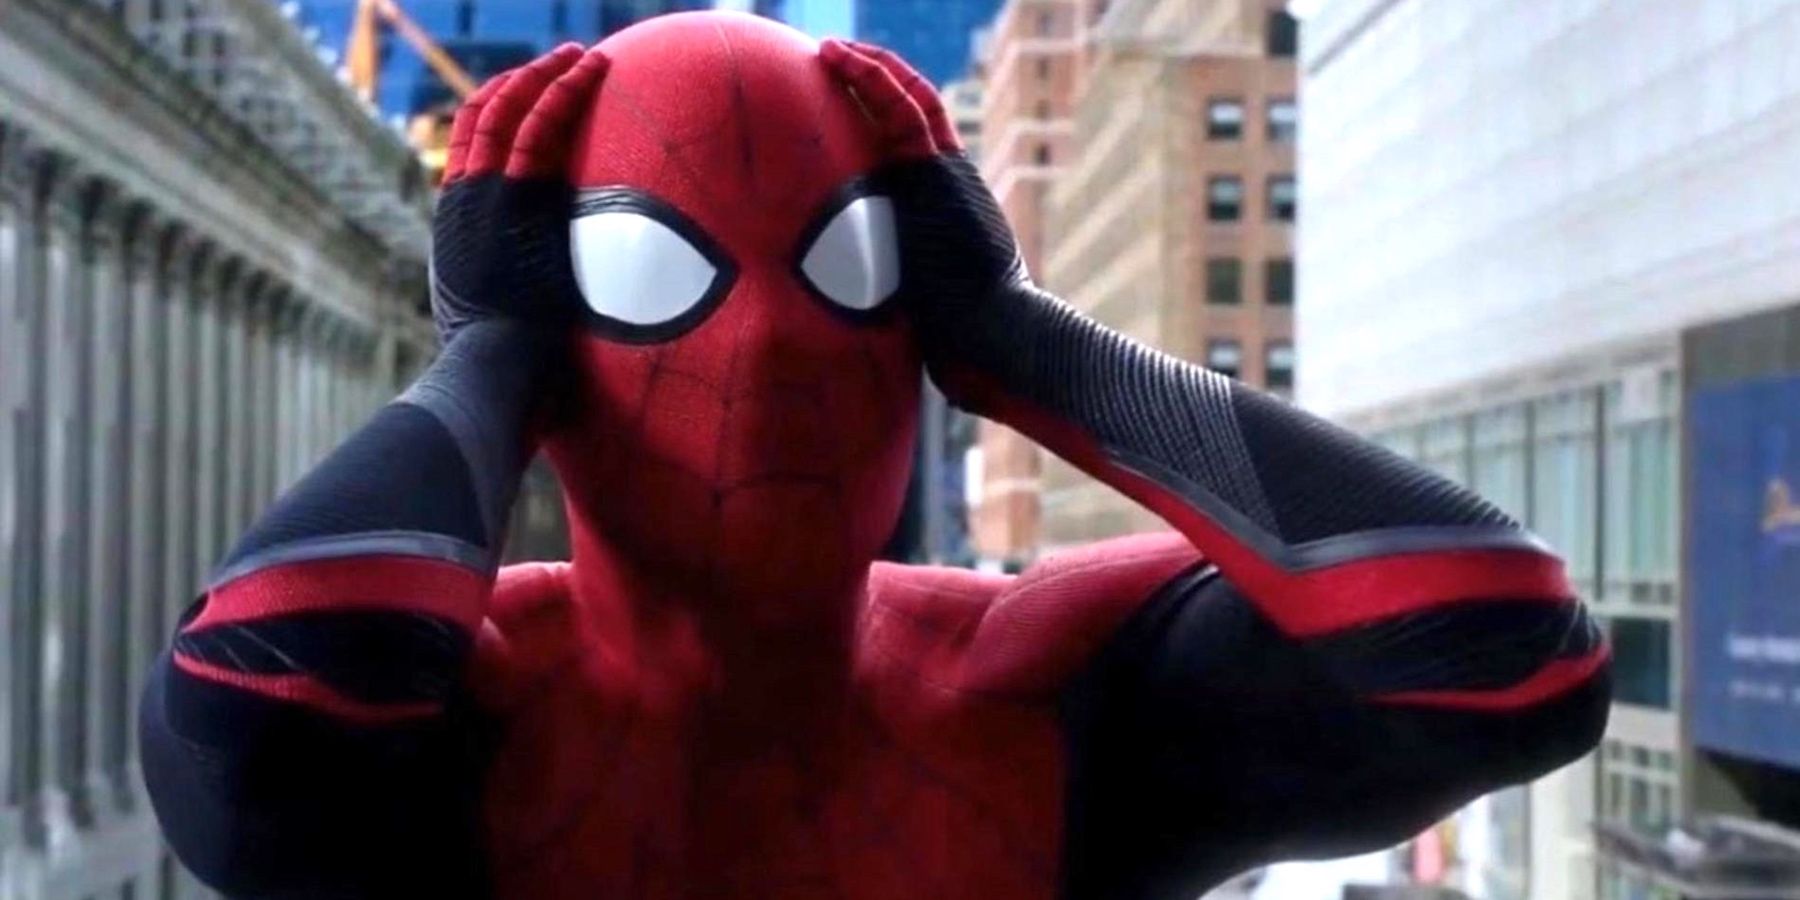 MCU’s Spider-Man 3 Movie Title Rumored To Be Homesick